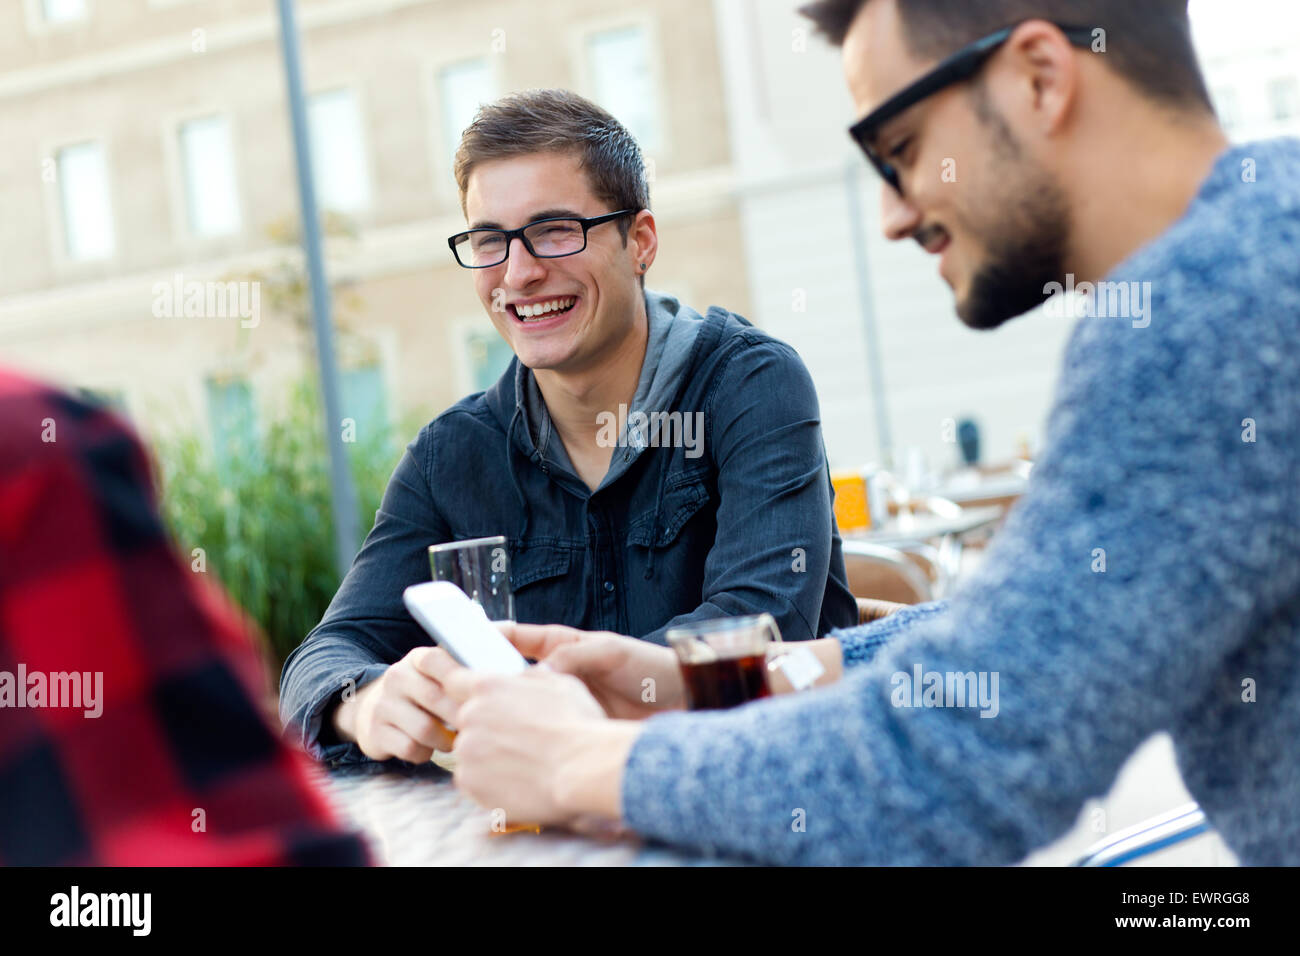 Outdoor portrait of young entrepreneurs working at coffee bar. Stock Photo